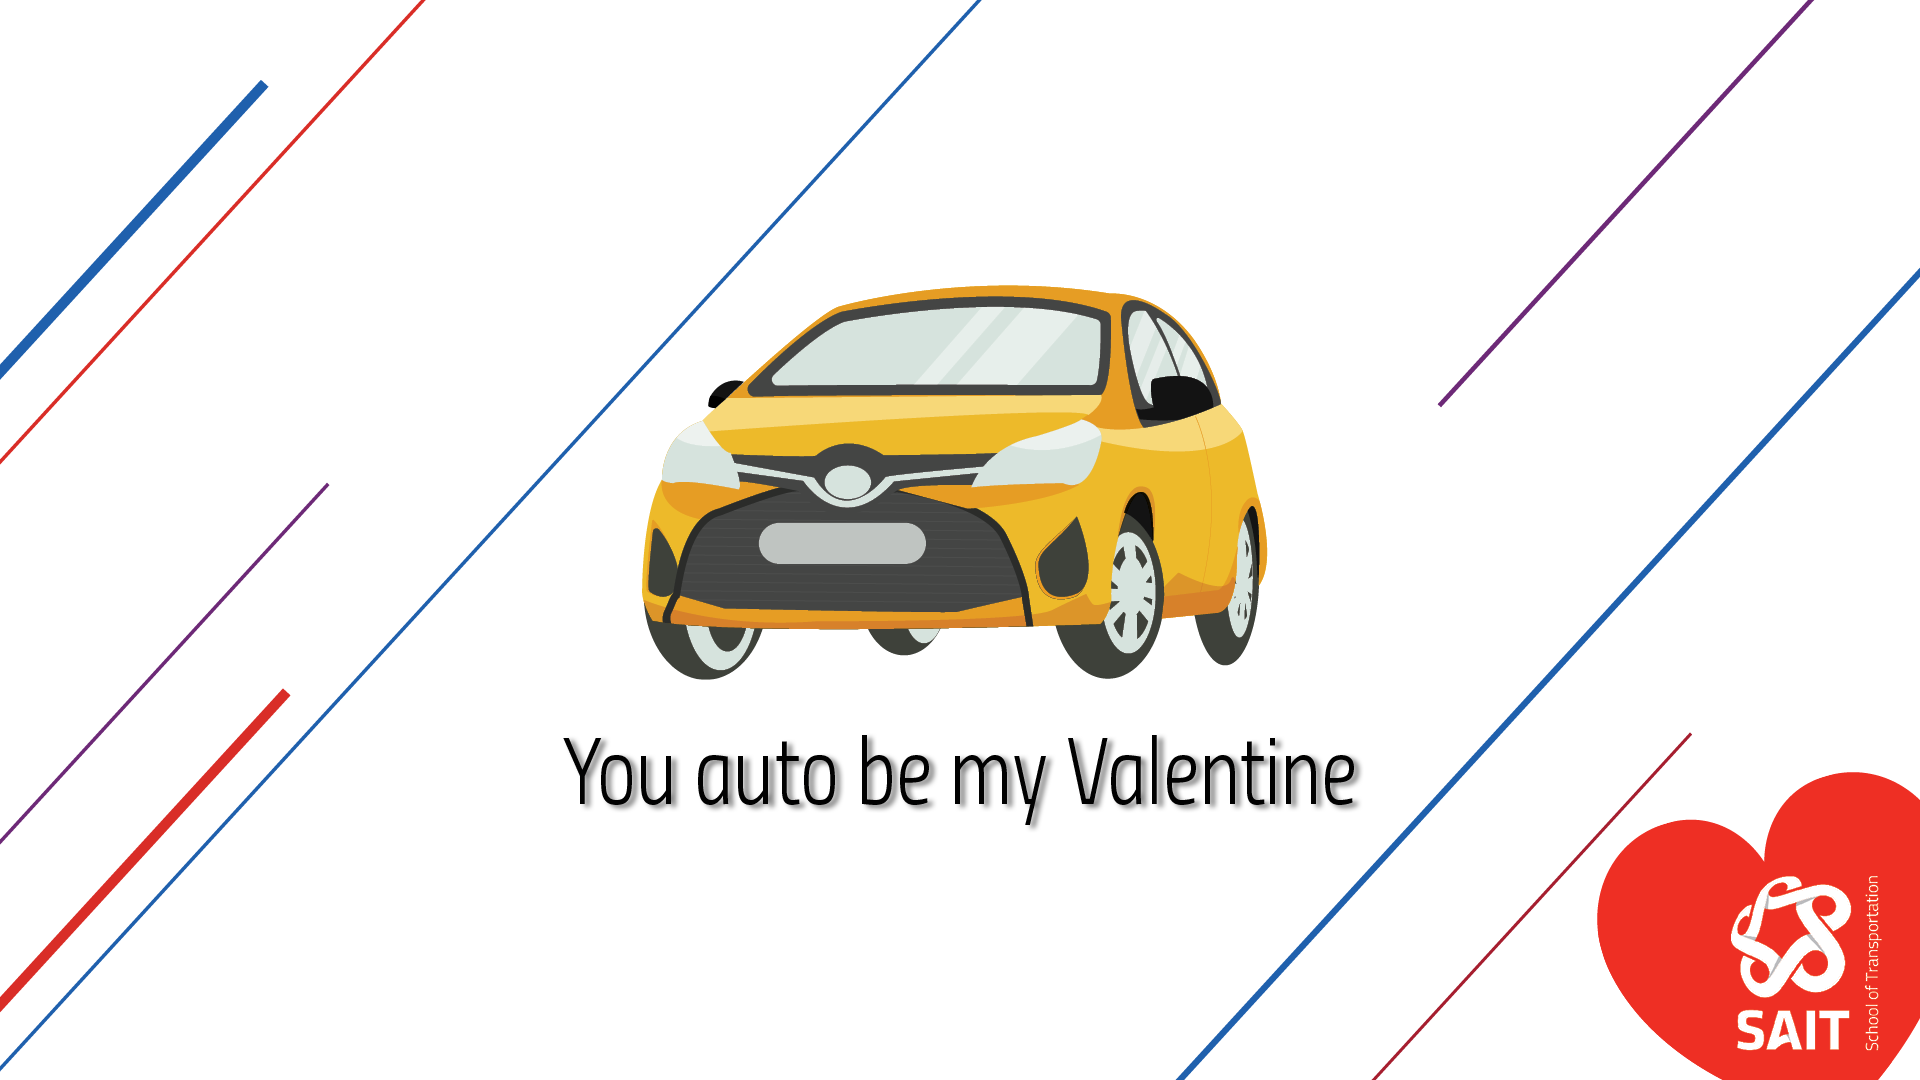 Valentines Day background for the School of Transportation